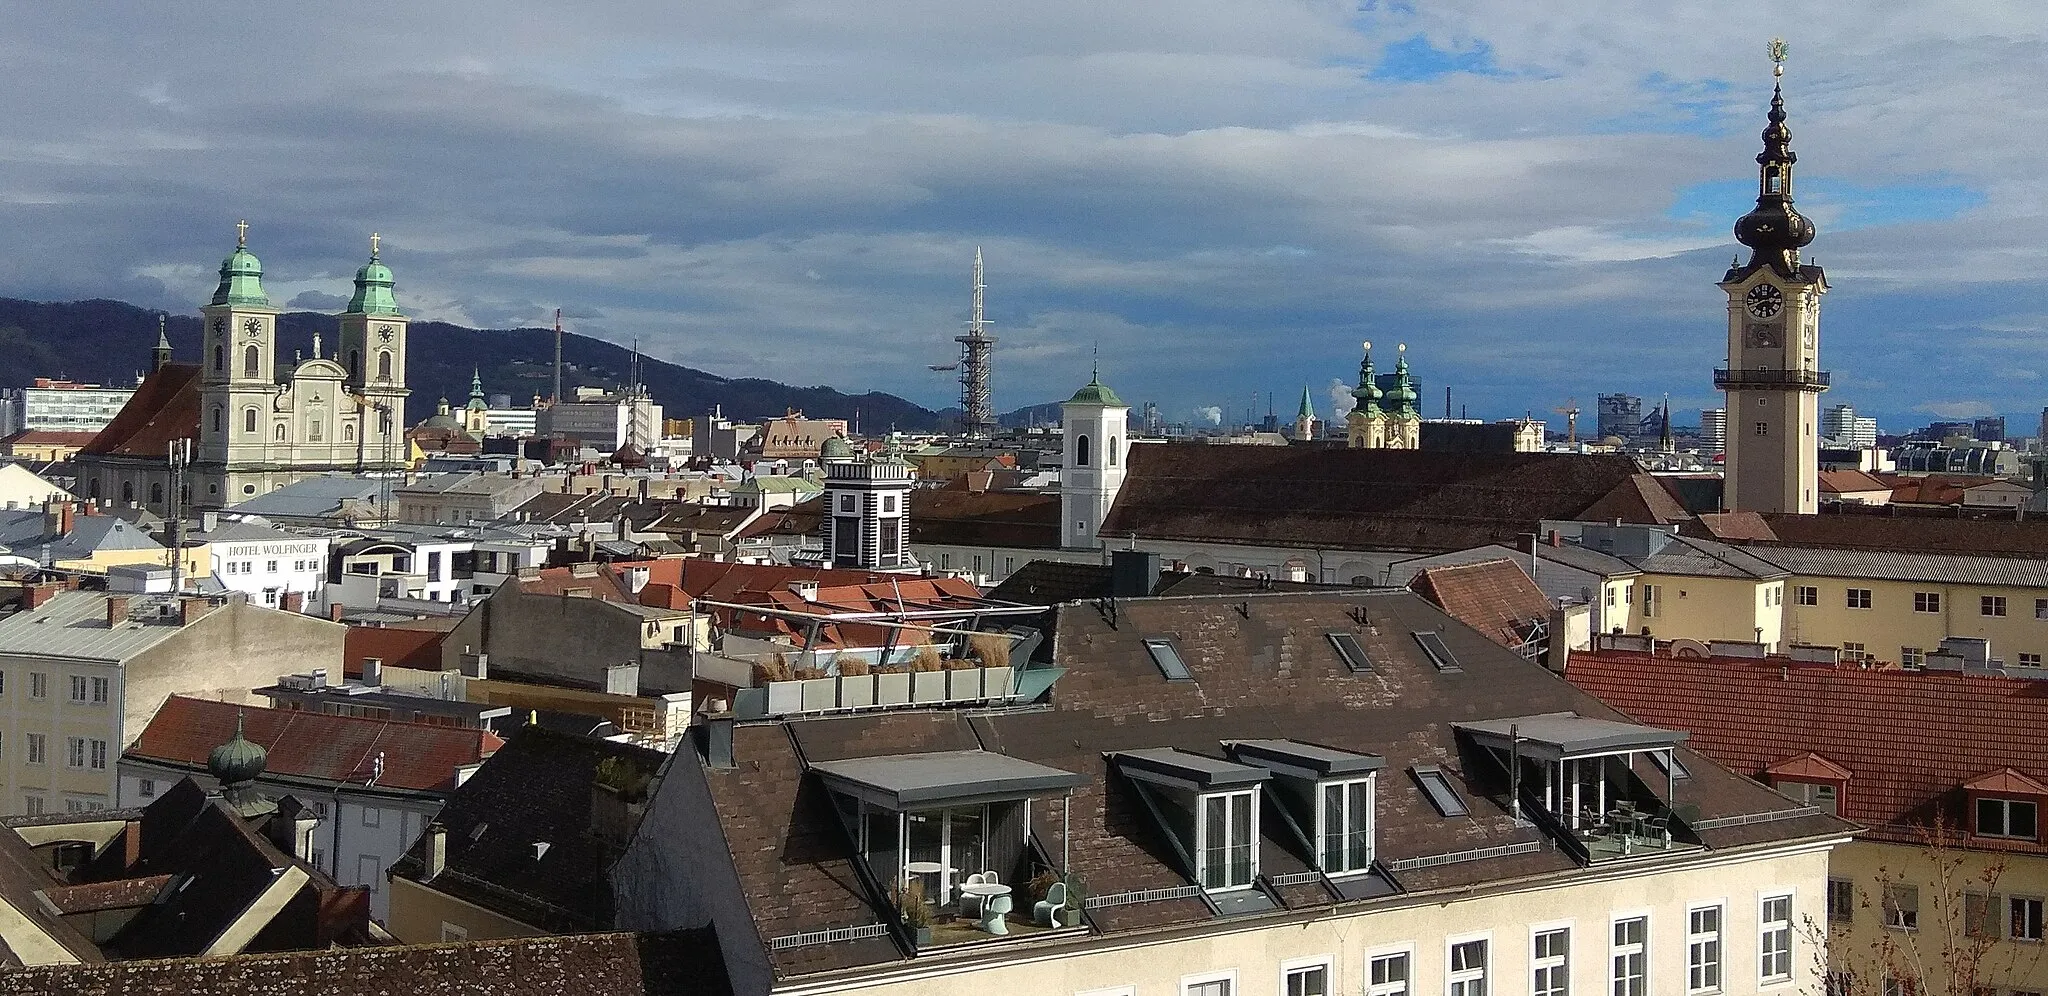 Photo showing: Views from the Schlossmuseum at Linz, where the Alter Dom (Ignatiuskirche) and the tower of the Landhaus can be seen